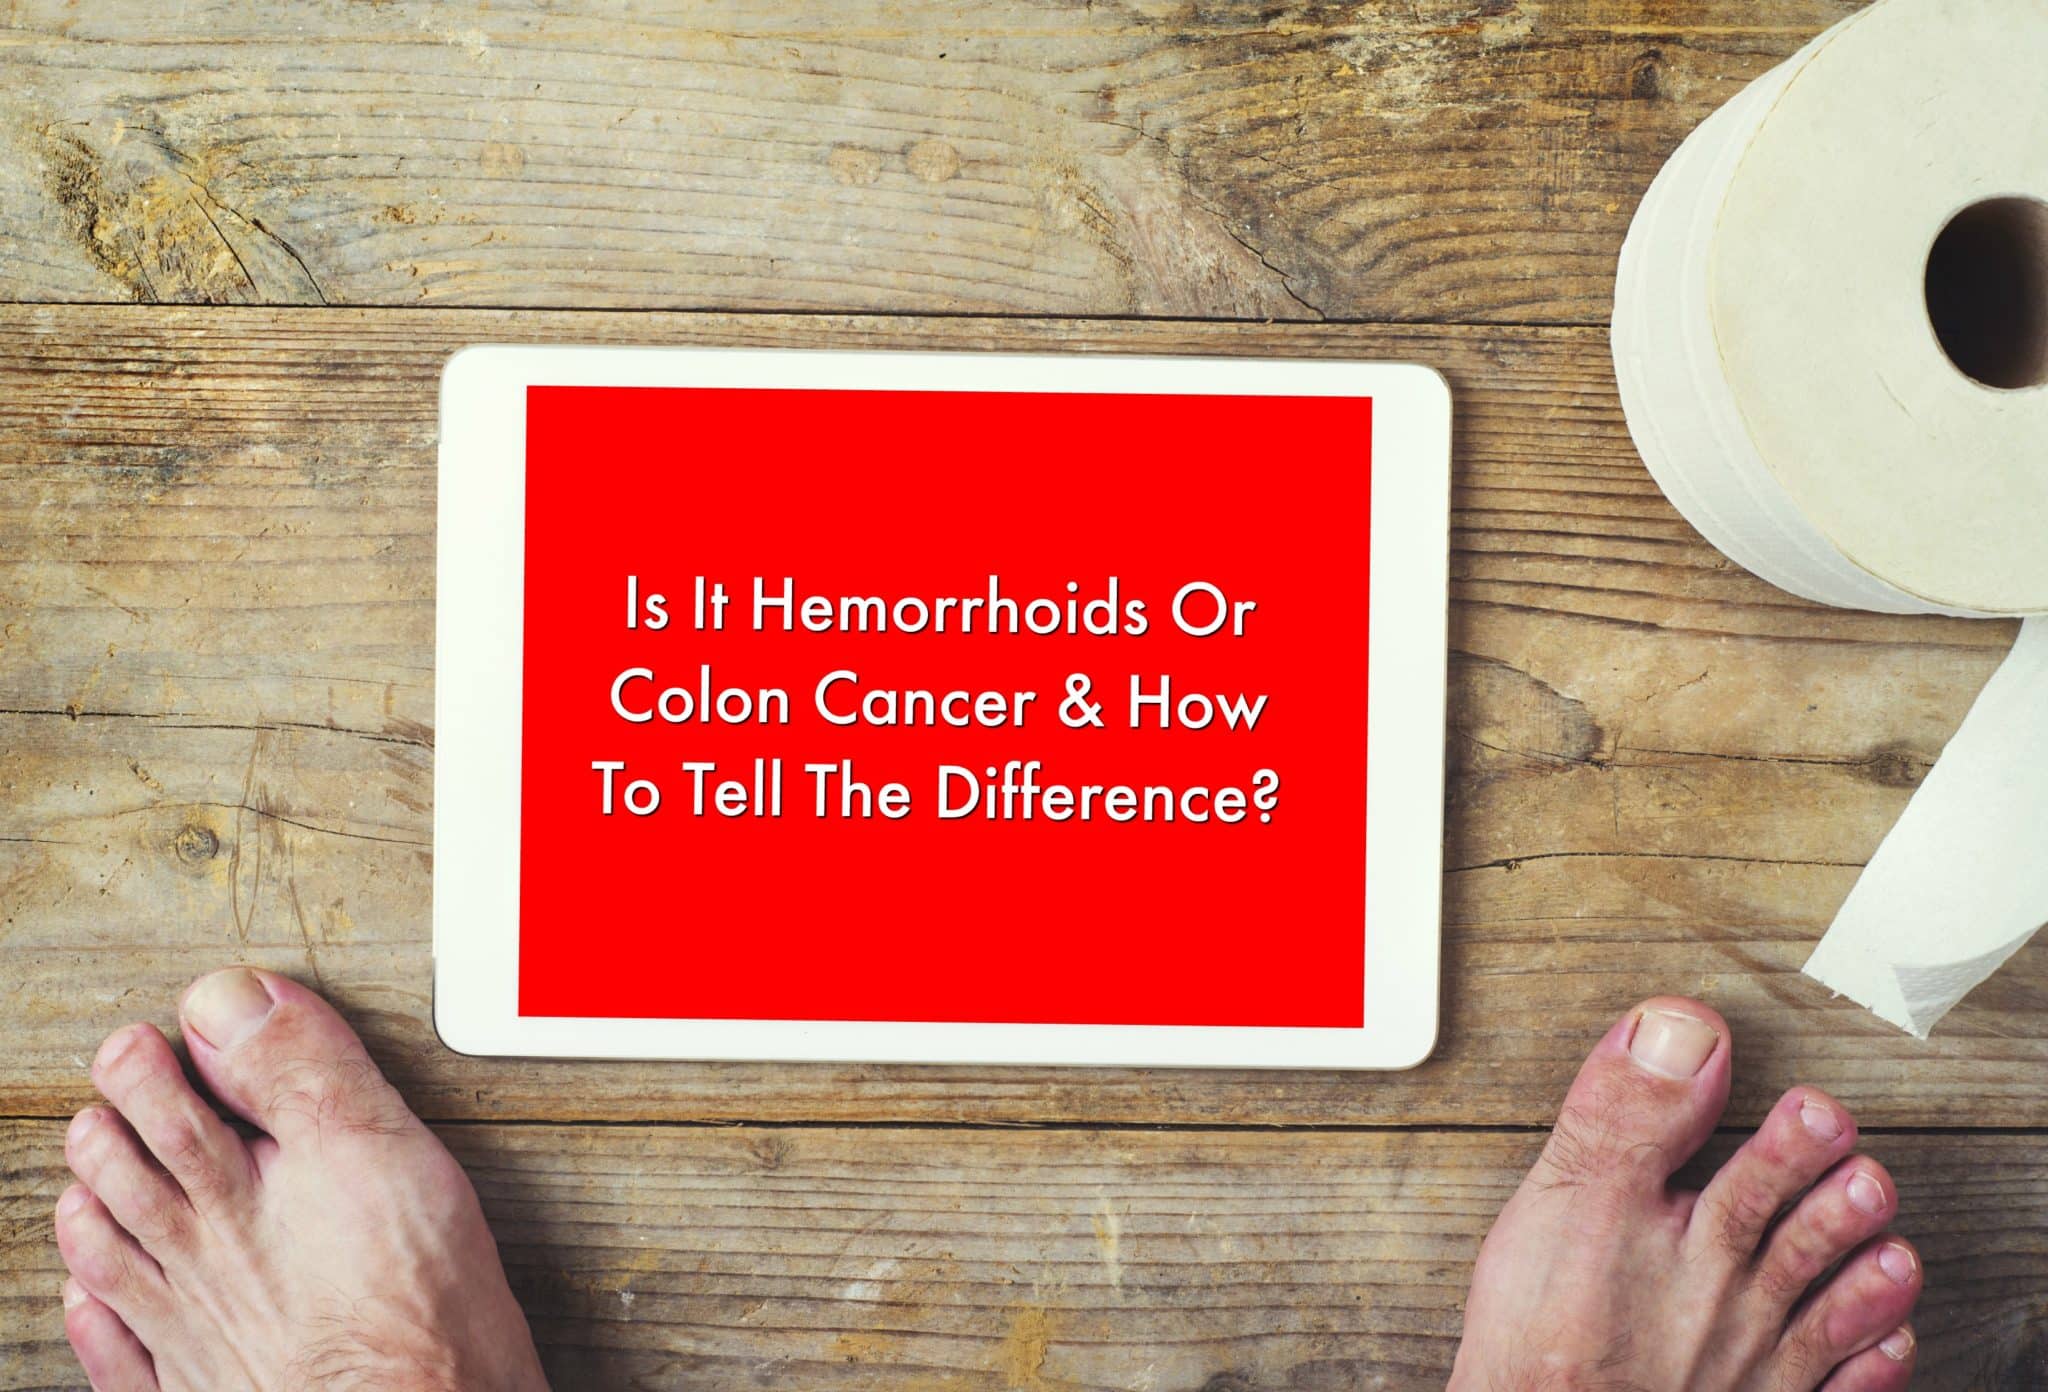 Is It Hemorrhoids Or Colon Cancer & How To Tell The